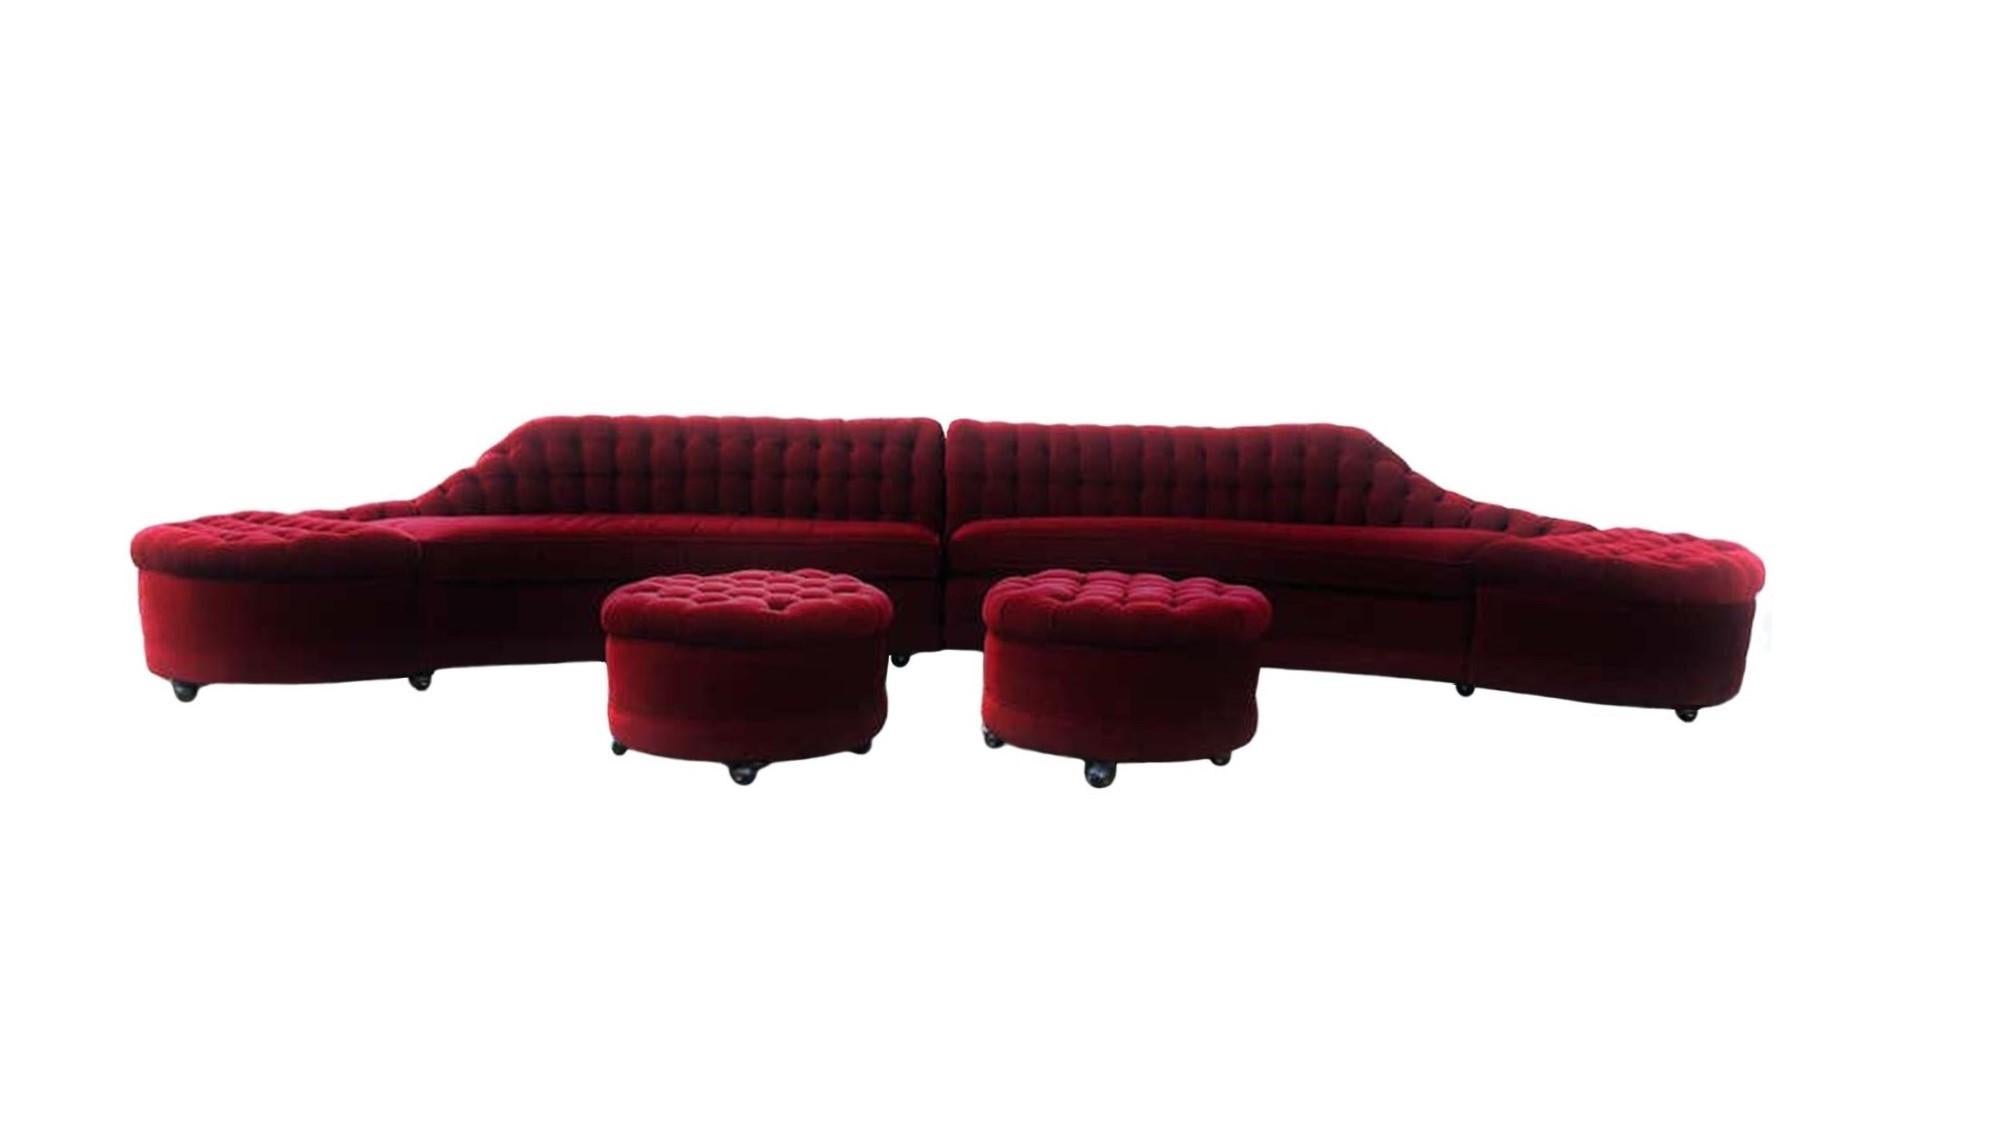 Vintage Hollywood Regency an extra long two-part sofa with a deep tufted back. The sofa splits in the centre, each side has a single seat cushion with rounded outer edge on an upholstered base, the extension has a tufted top and also has a curved